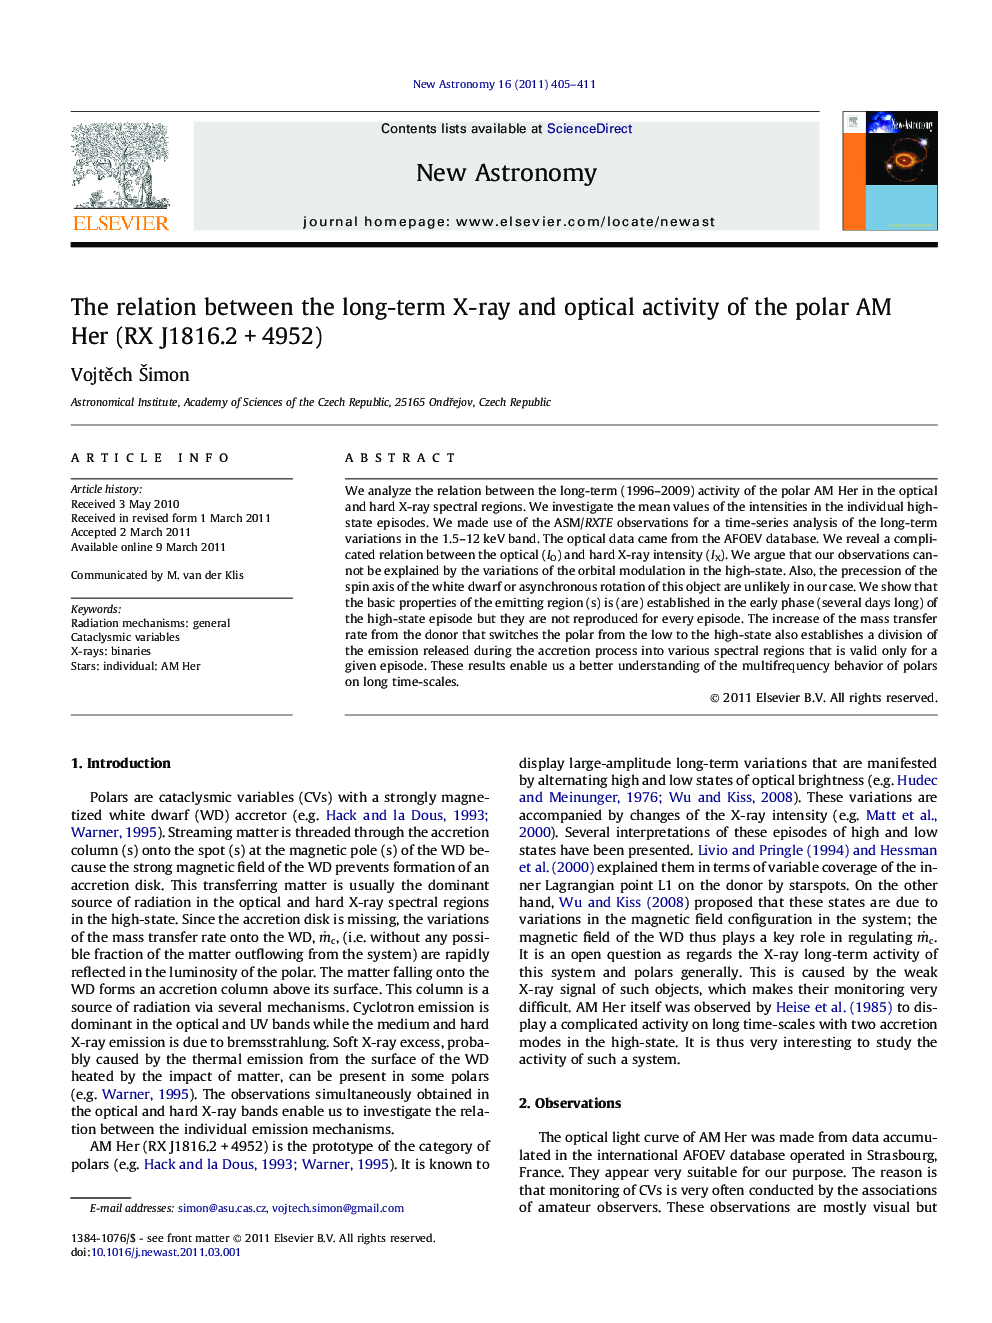 The relation between the long-term X-ray and optical activity of the polar AM Her (RX J1816.2Â +Â 4952)